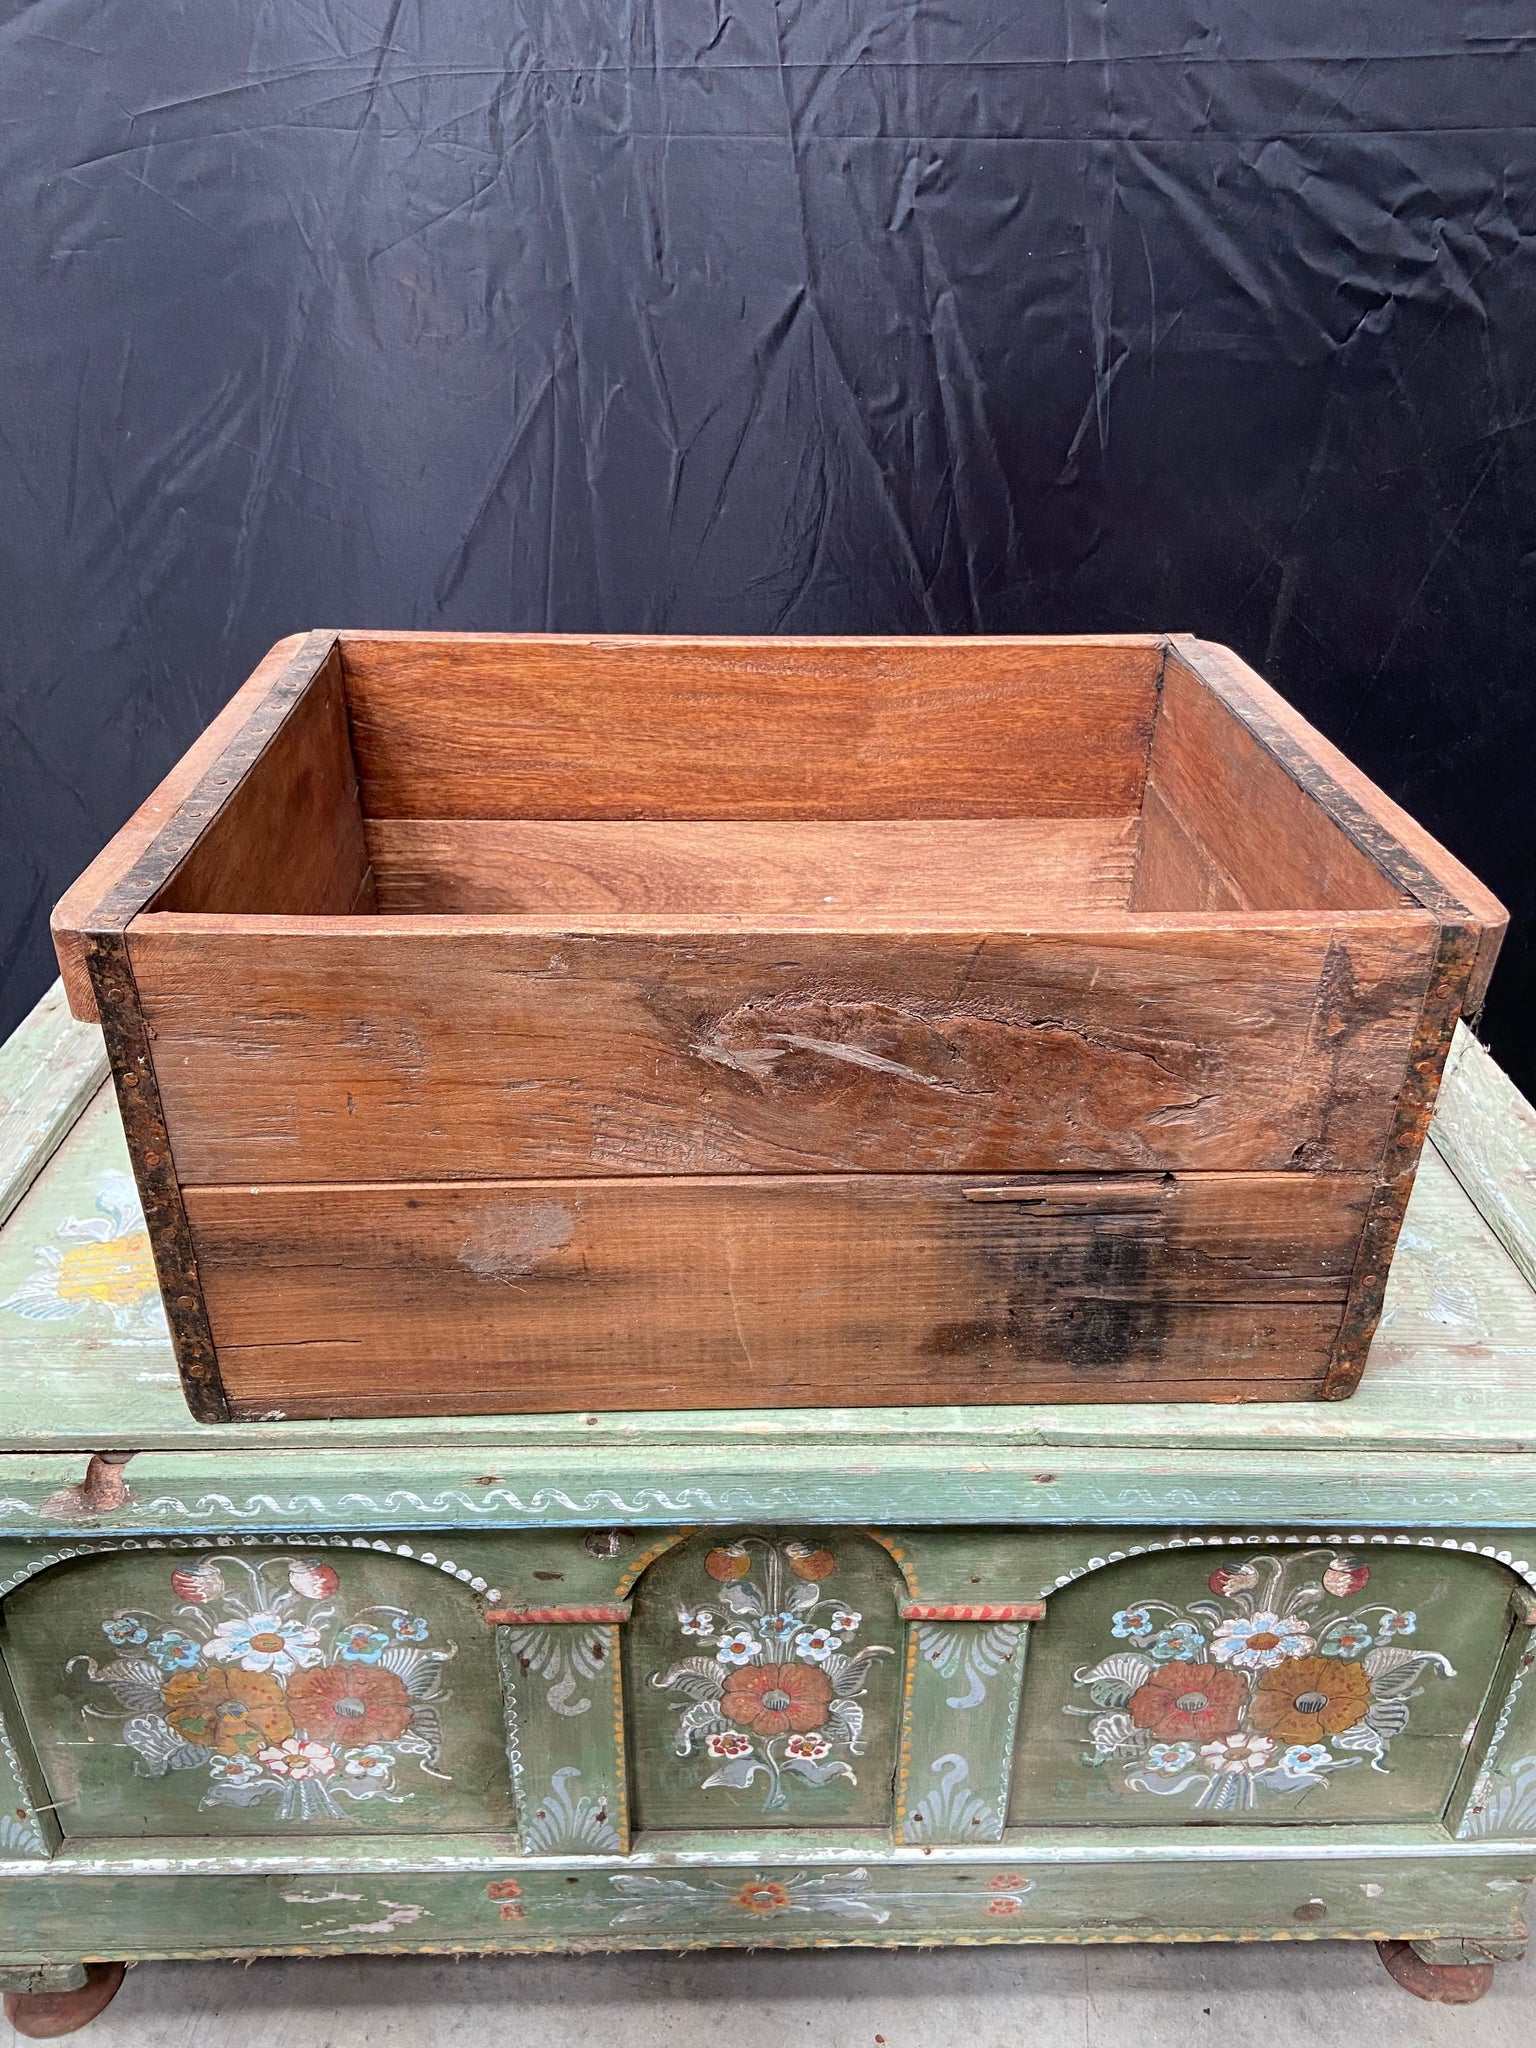 Rustic wooden crate with missing planks at the bottom Ashwood Film TV Props London